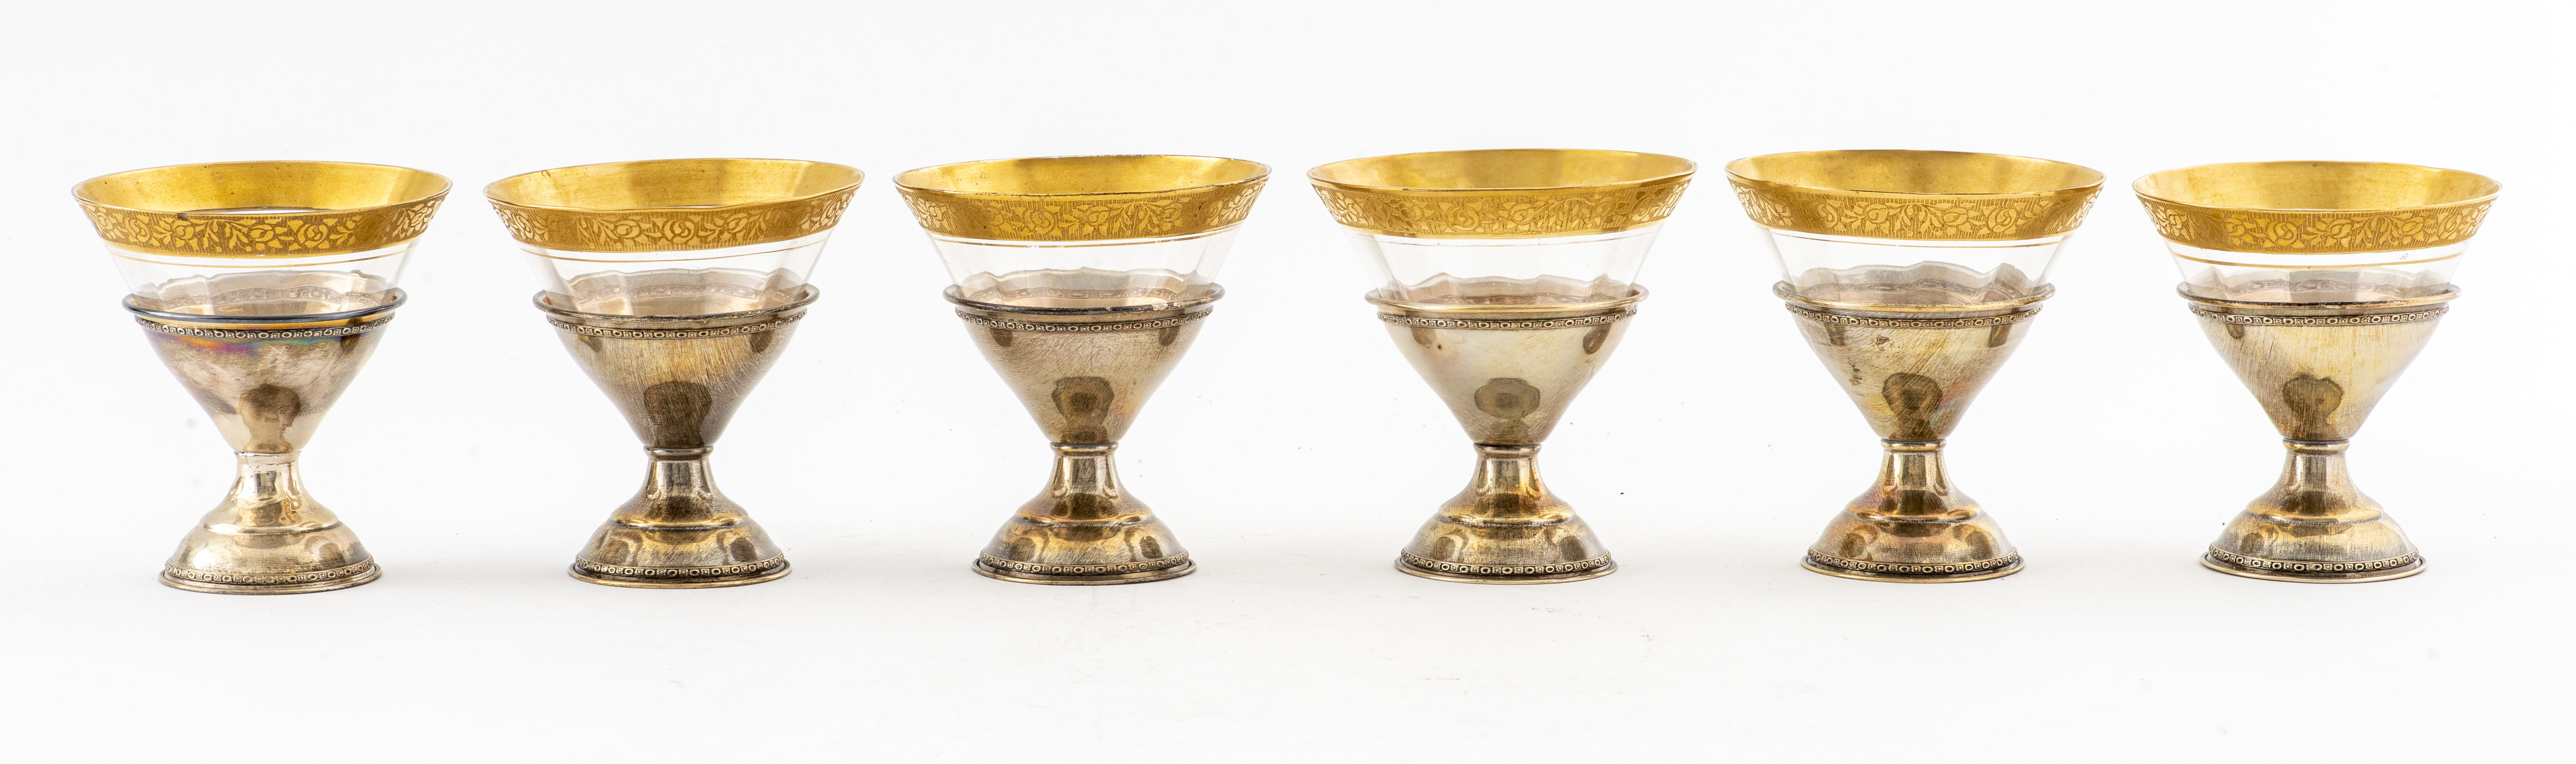 STERLING SILVER AND GILT GLASSES,